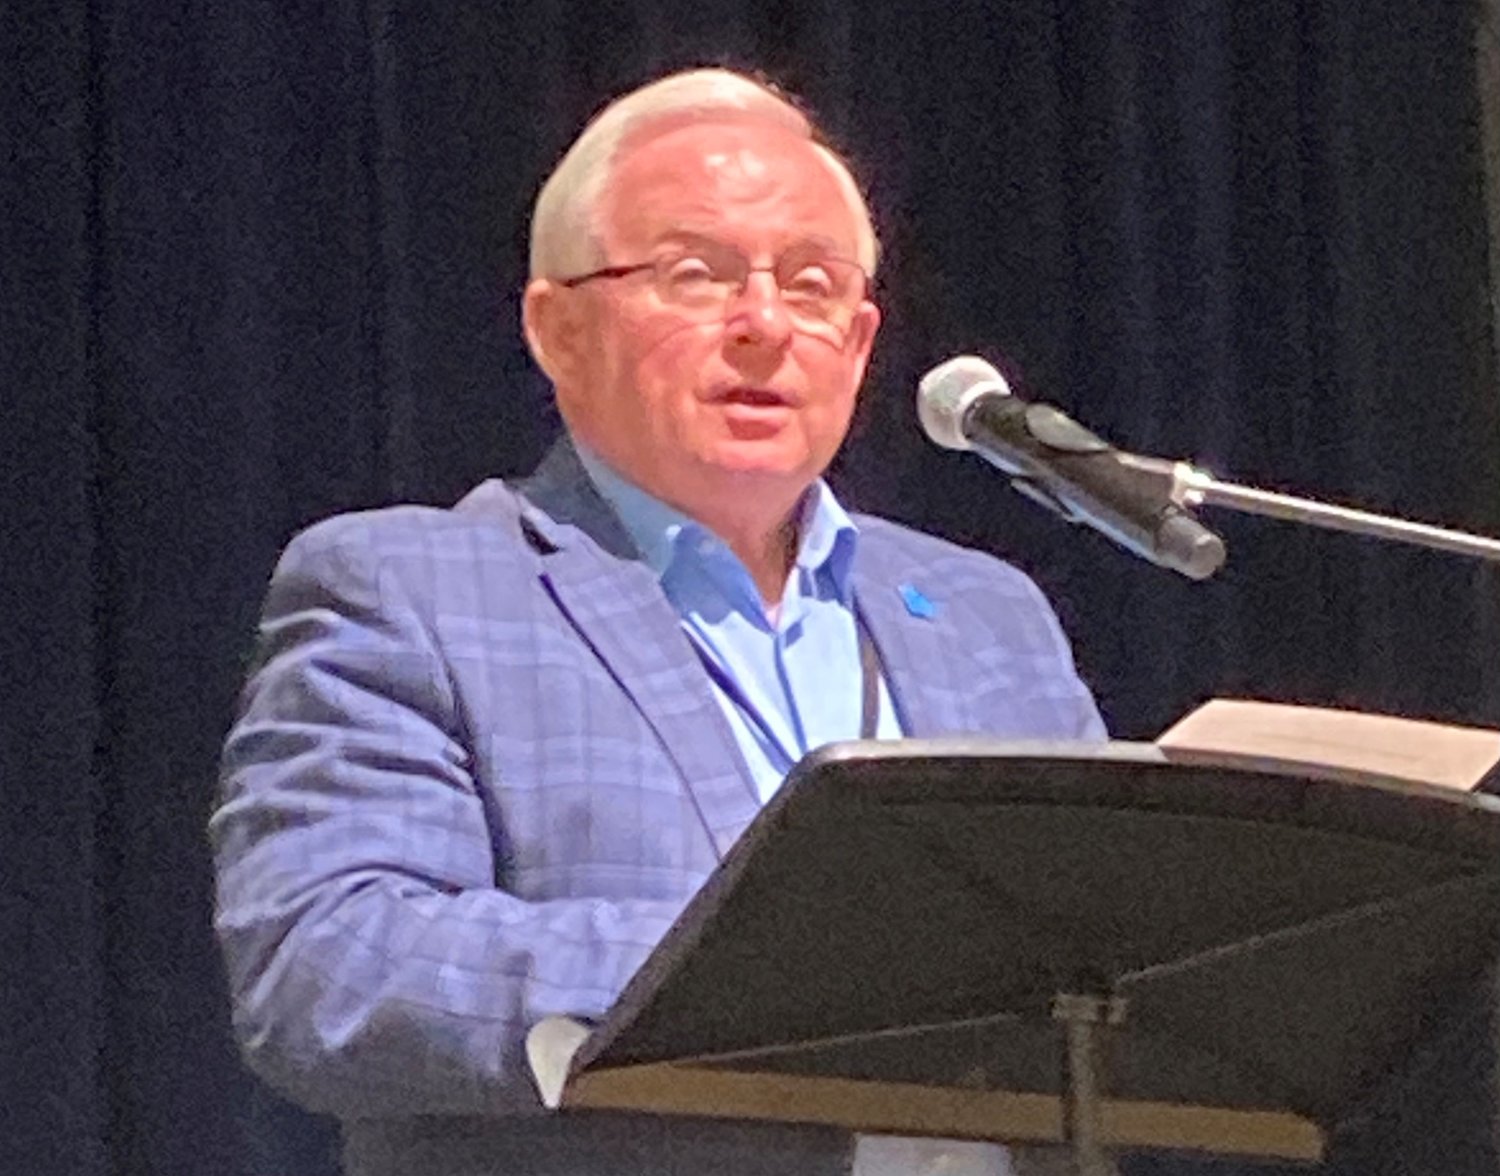 Georgia Baptist Executive Committee Chairman Tommy Fountain Sr. presents a motion to create a special committee to recommend guidelines for the prevention of sexual abuse. (Index/Roger Alford)